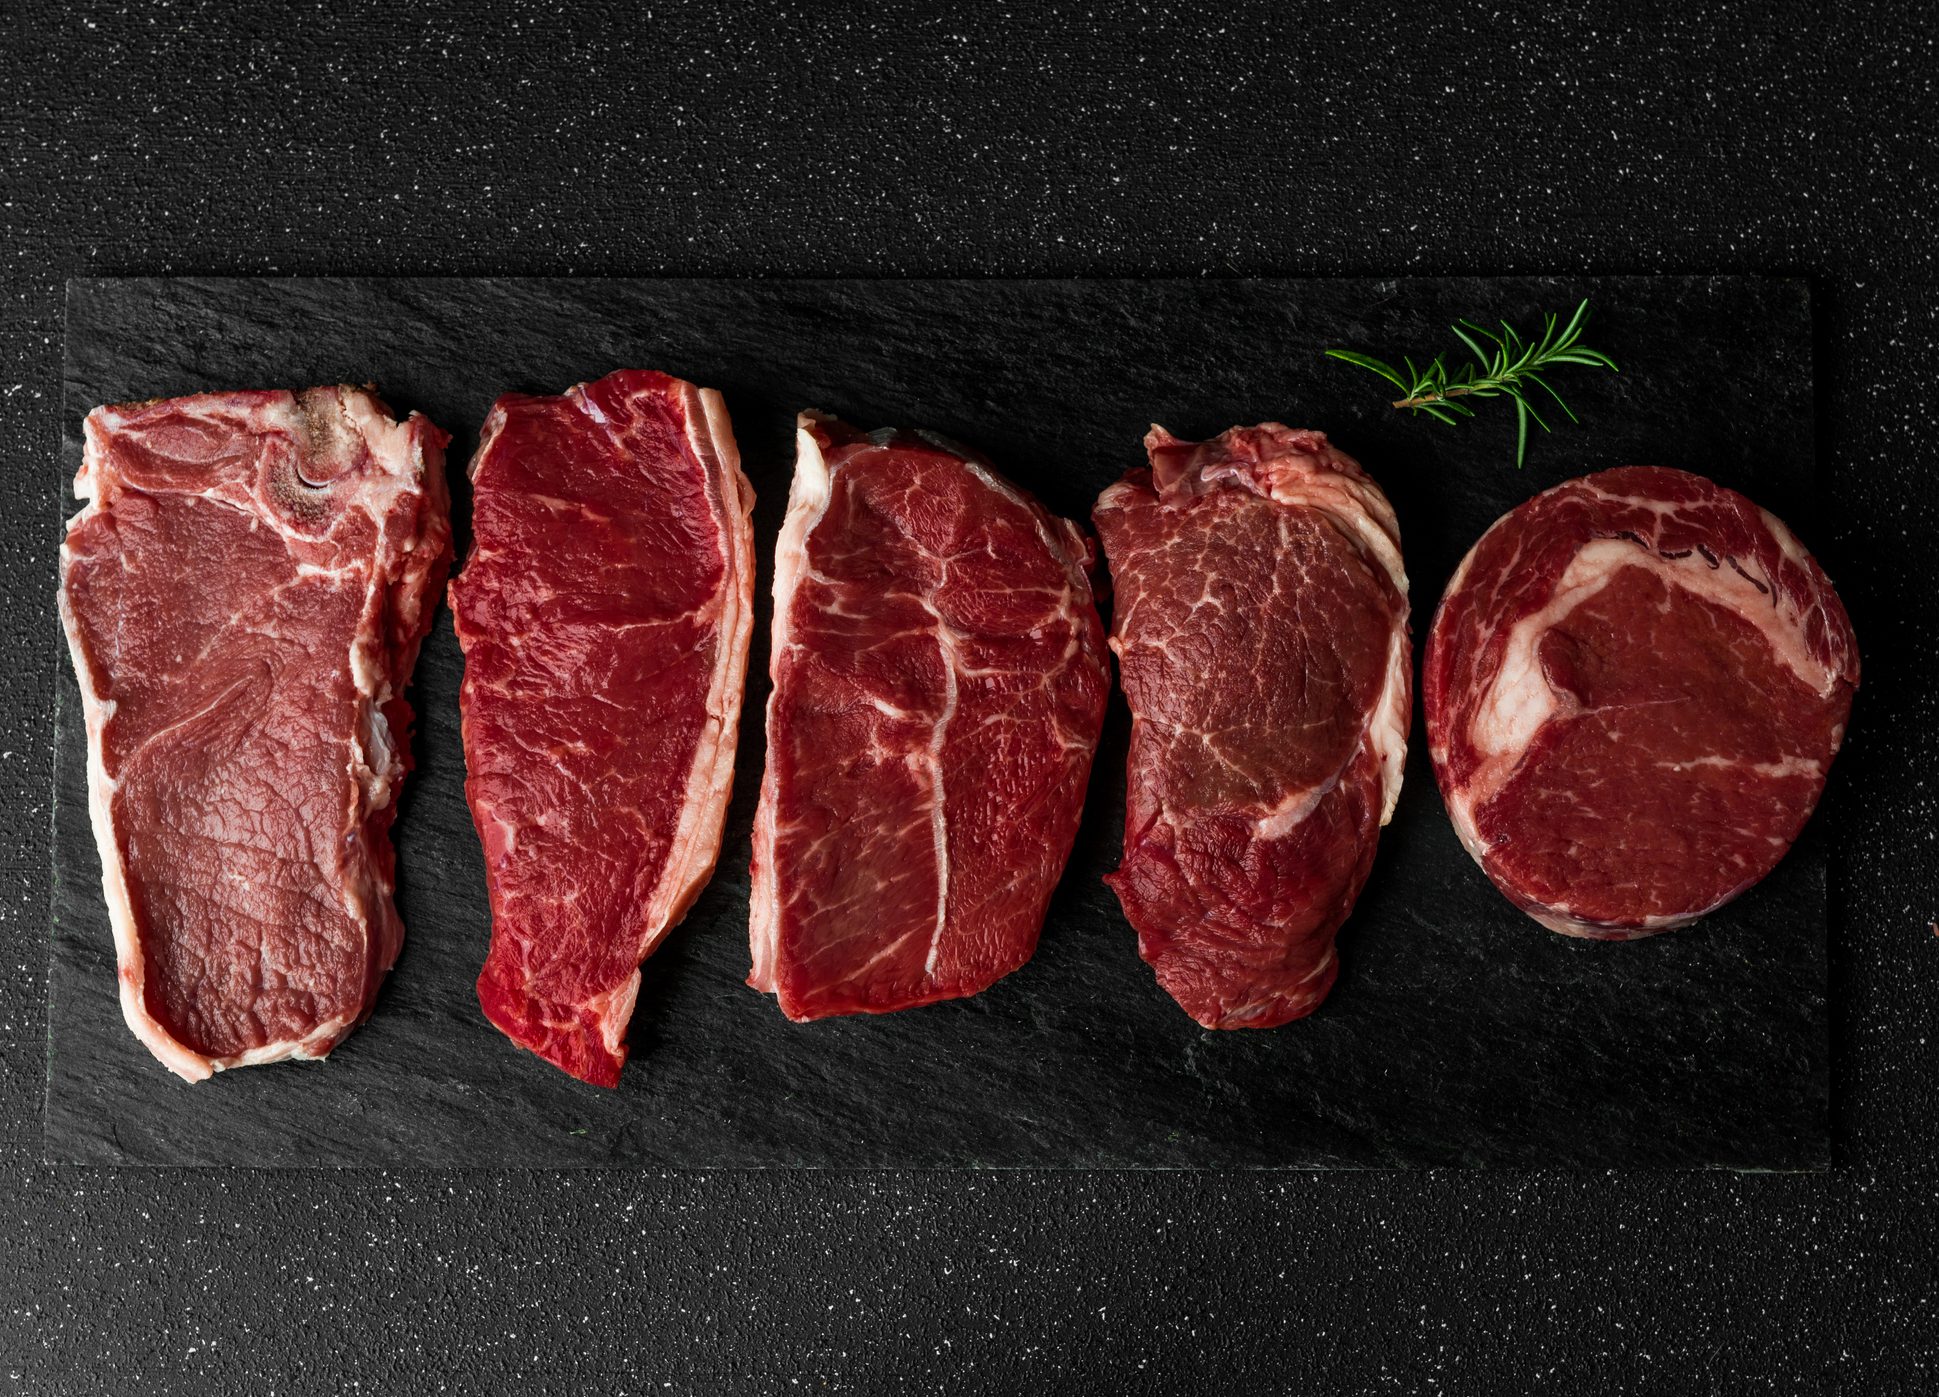 FUNIBER-selection-of-raw-beef-meat-food-steaks-against-black-stone-background-new-york-striploin-steak-top-blade-rib-eye-and-other-cuts-of-meat-